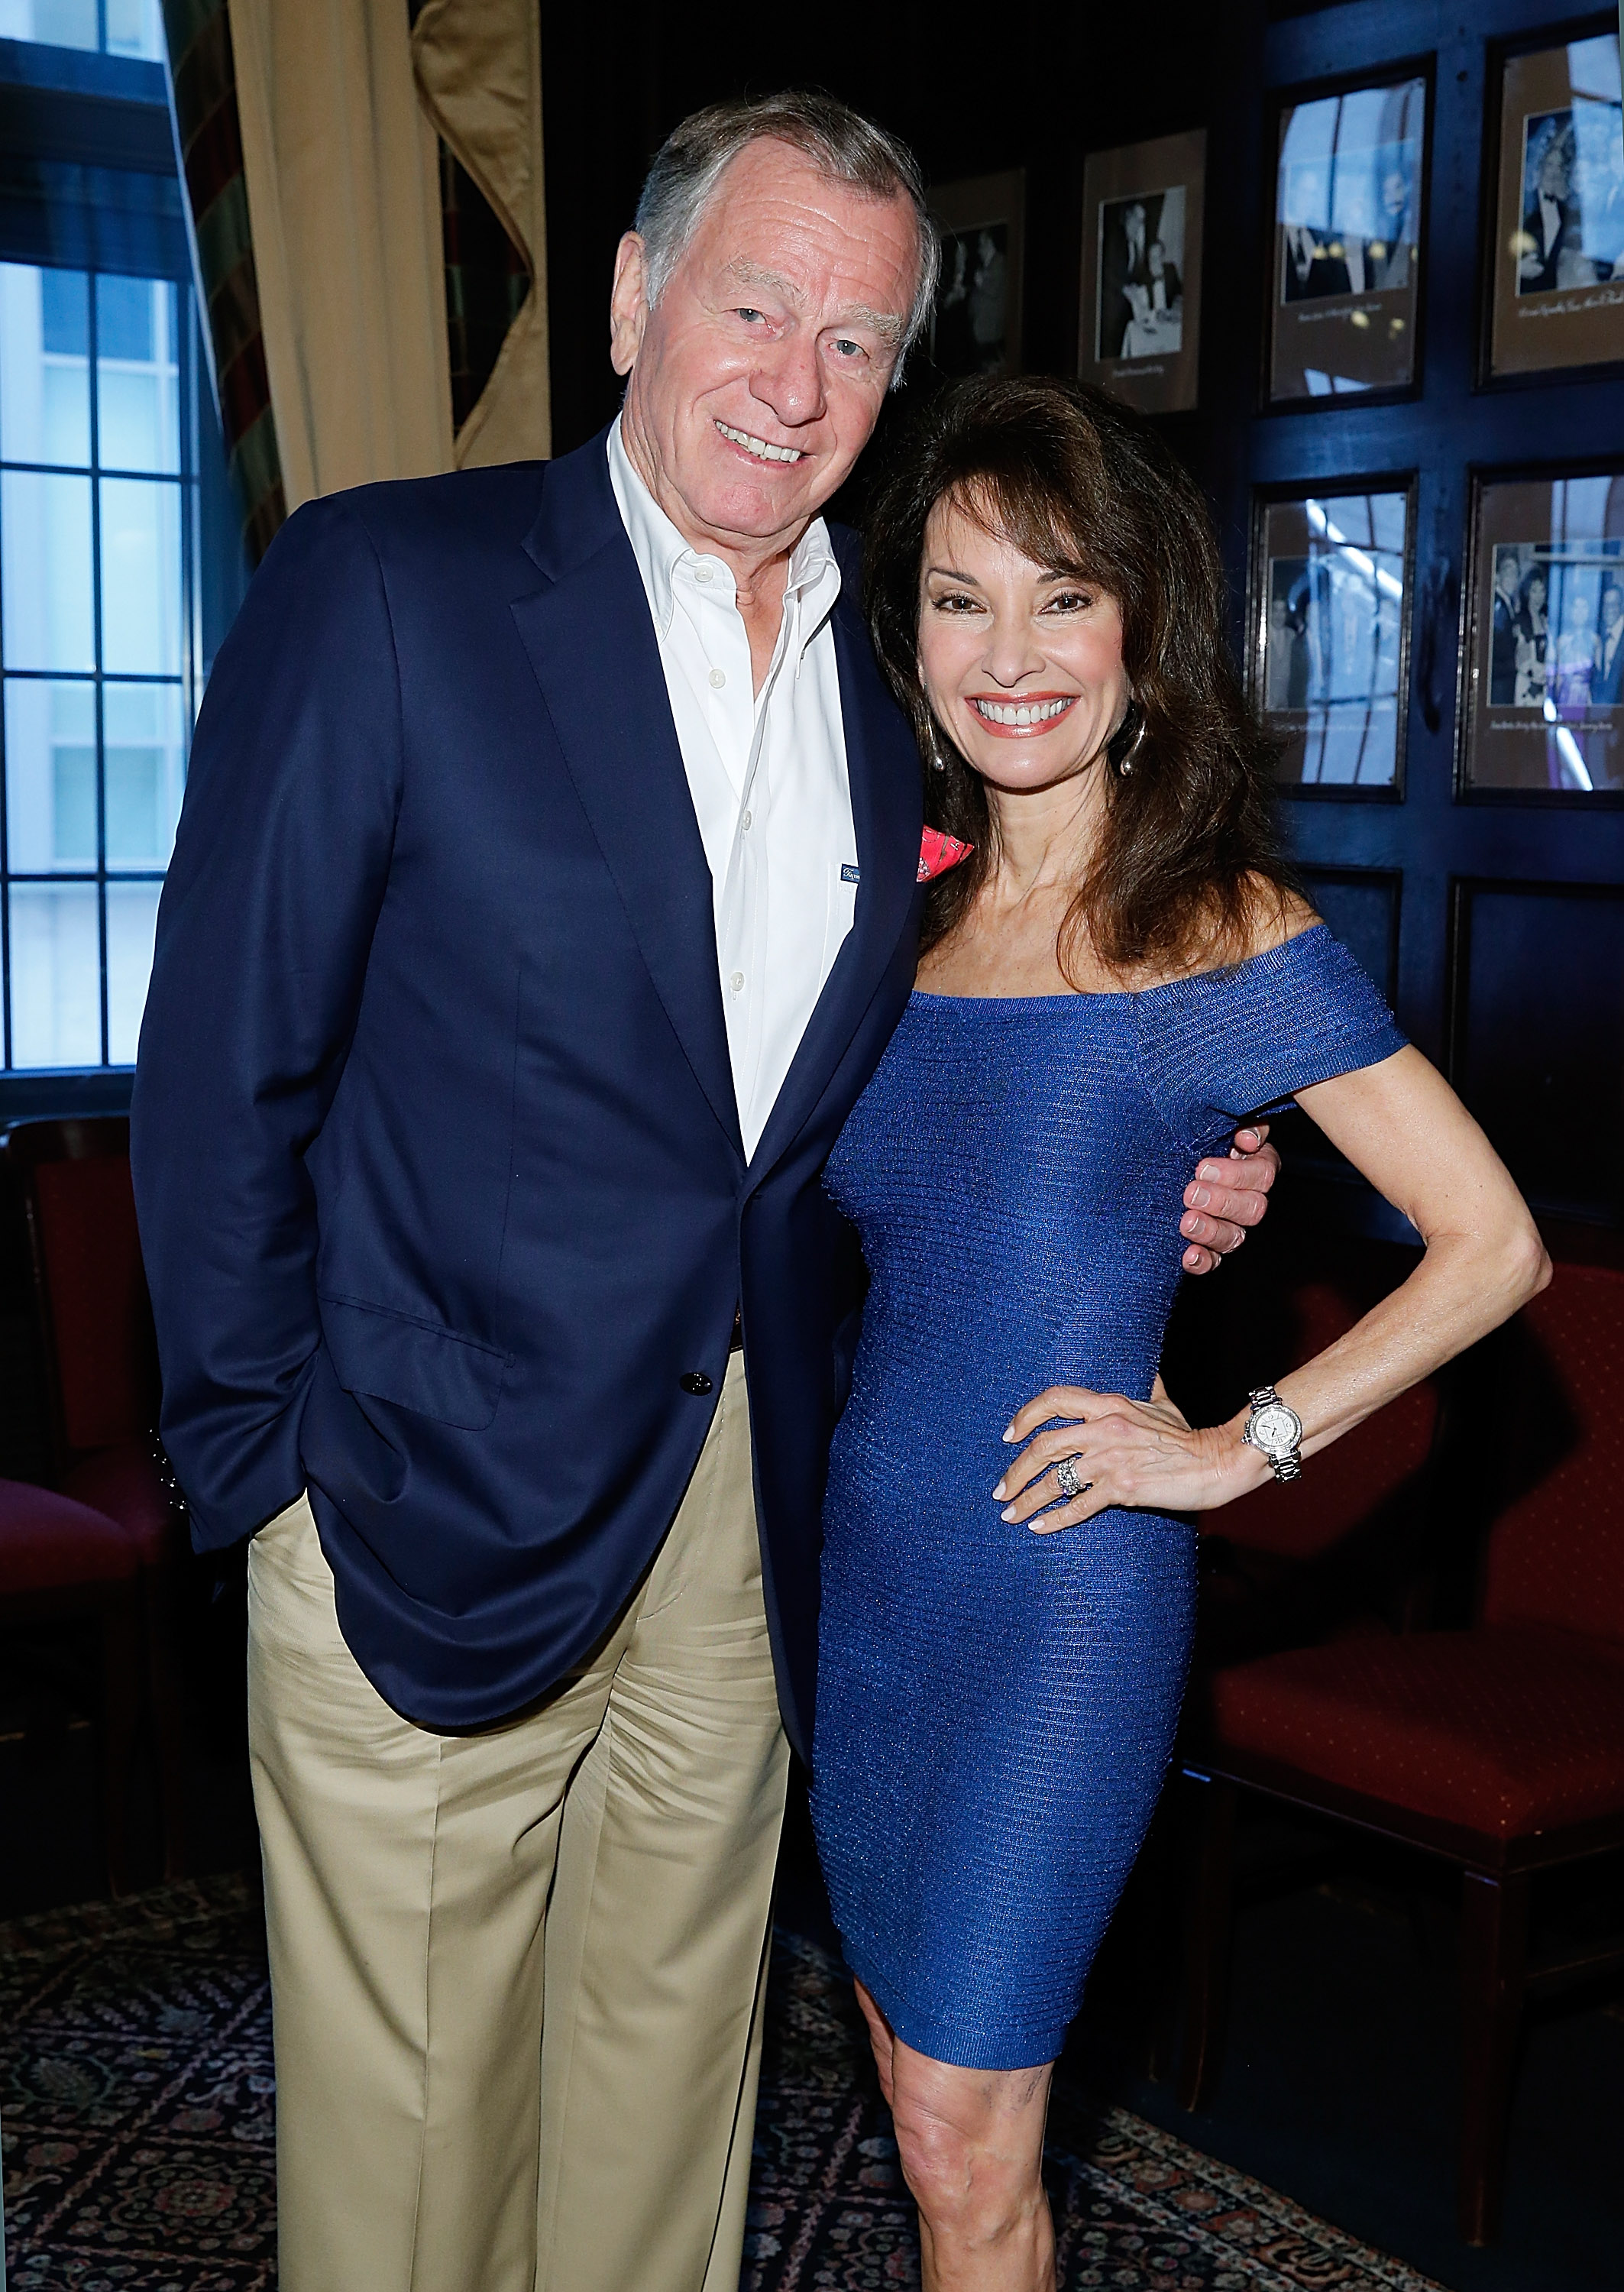 Helmut Huber and Susan Lucci at an event on June 3, 2014 in New York City. | Source: Getty Images